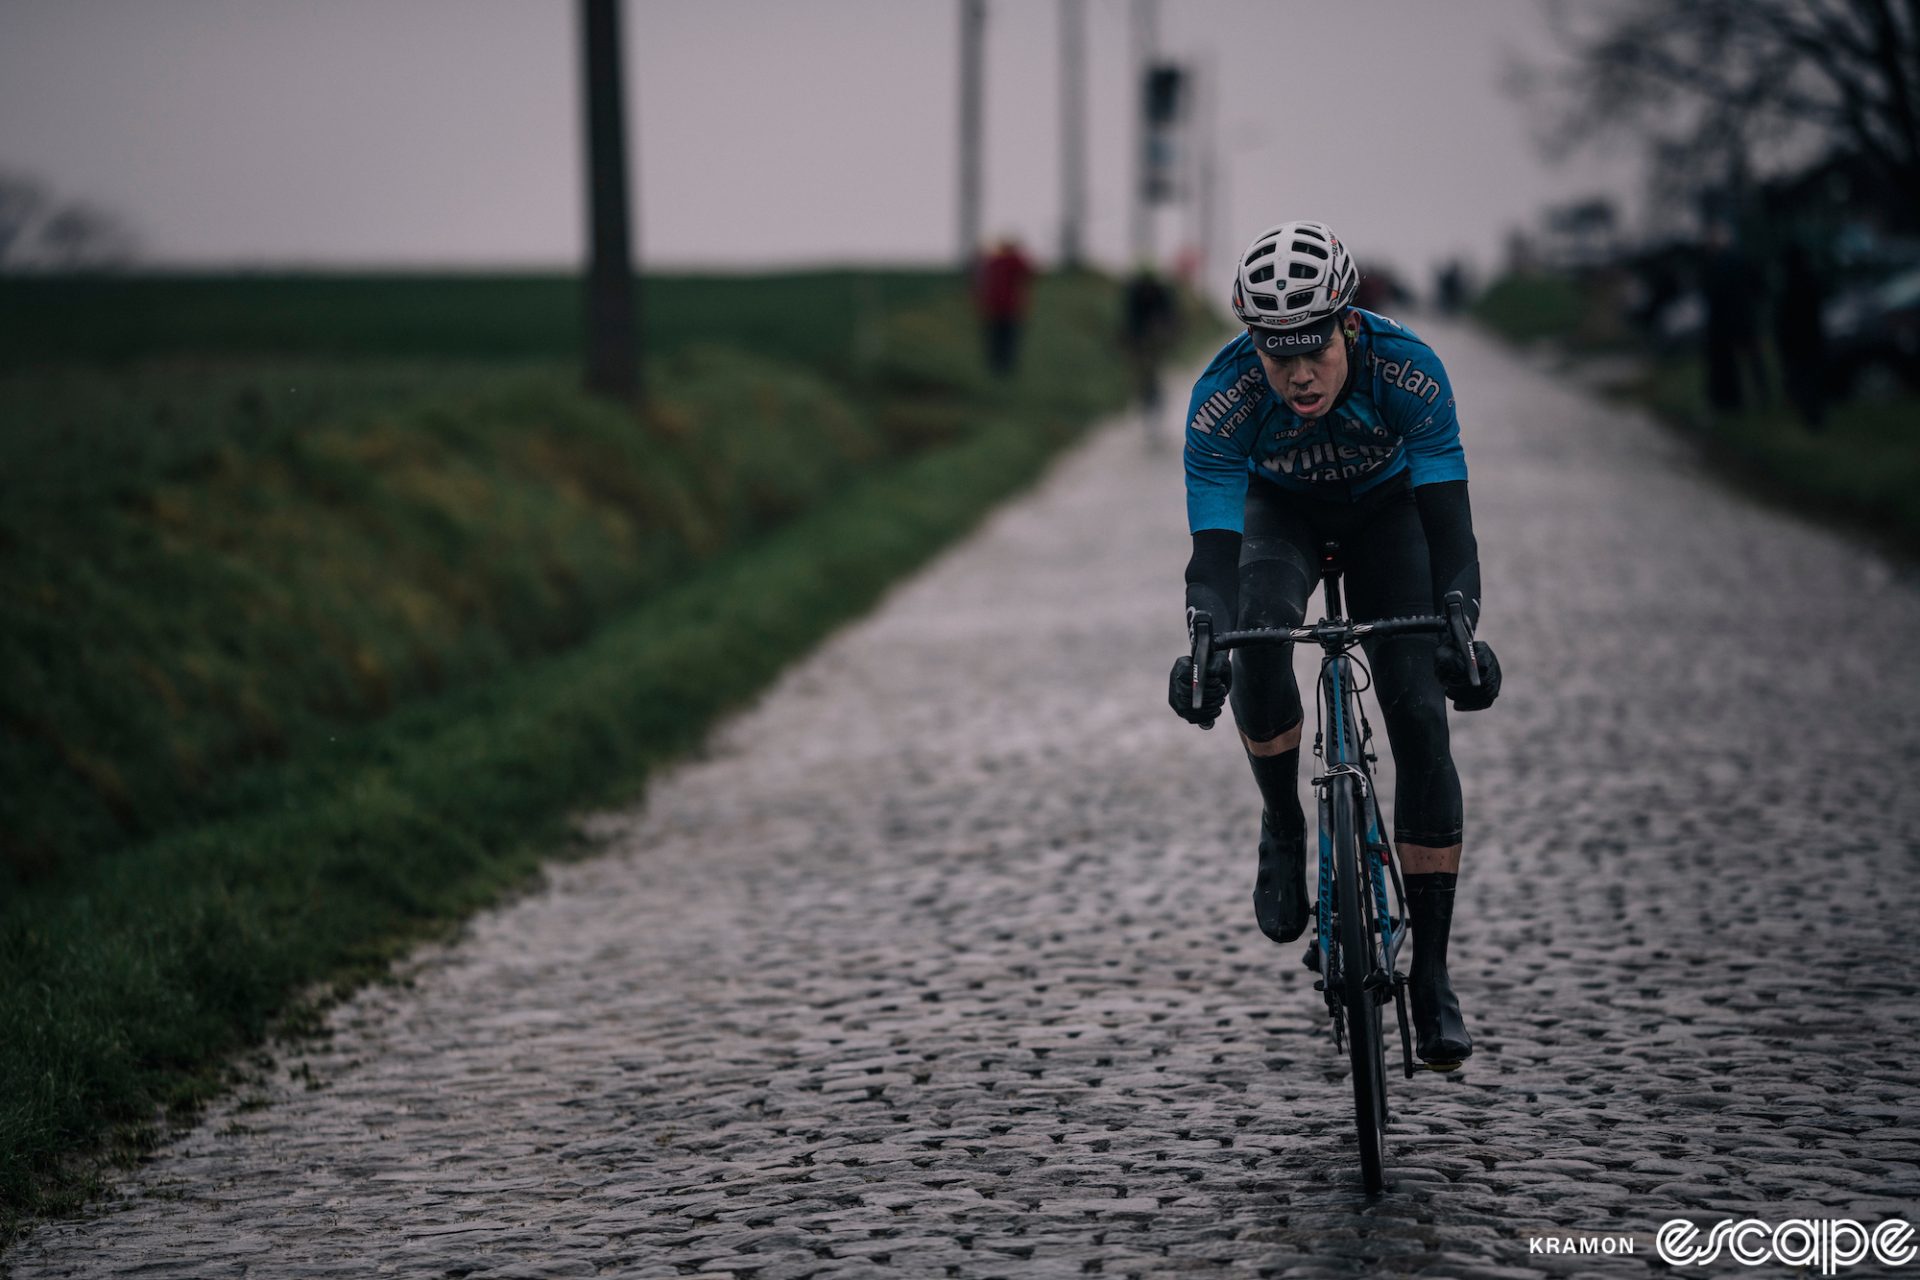 Wout van Aert rides on cobblestones at the Dwars Door Vlaanderen race in 2018. It's cloudy and rainy and the lighting is dark and moody. He's in the blue of Verandas Willems, a team he would soon force his exit from.